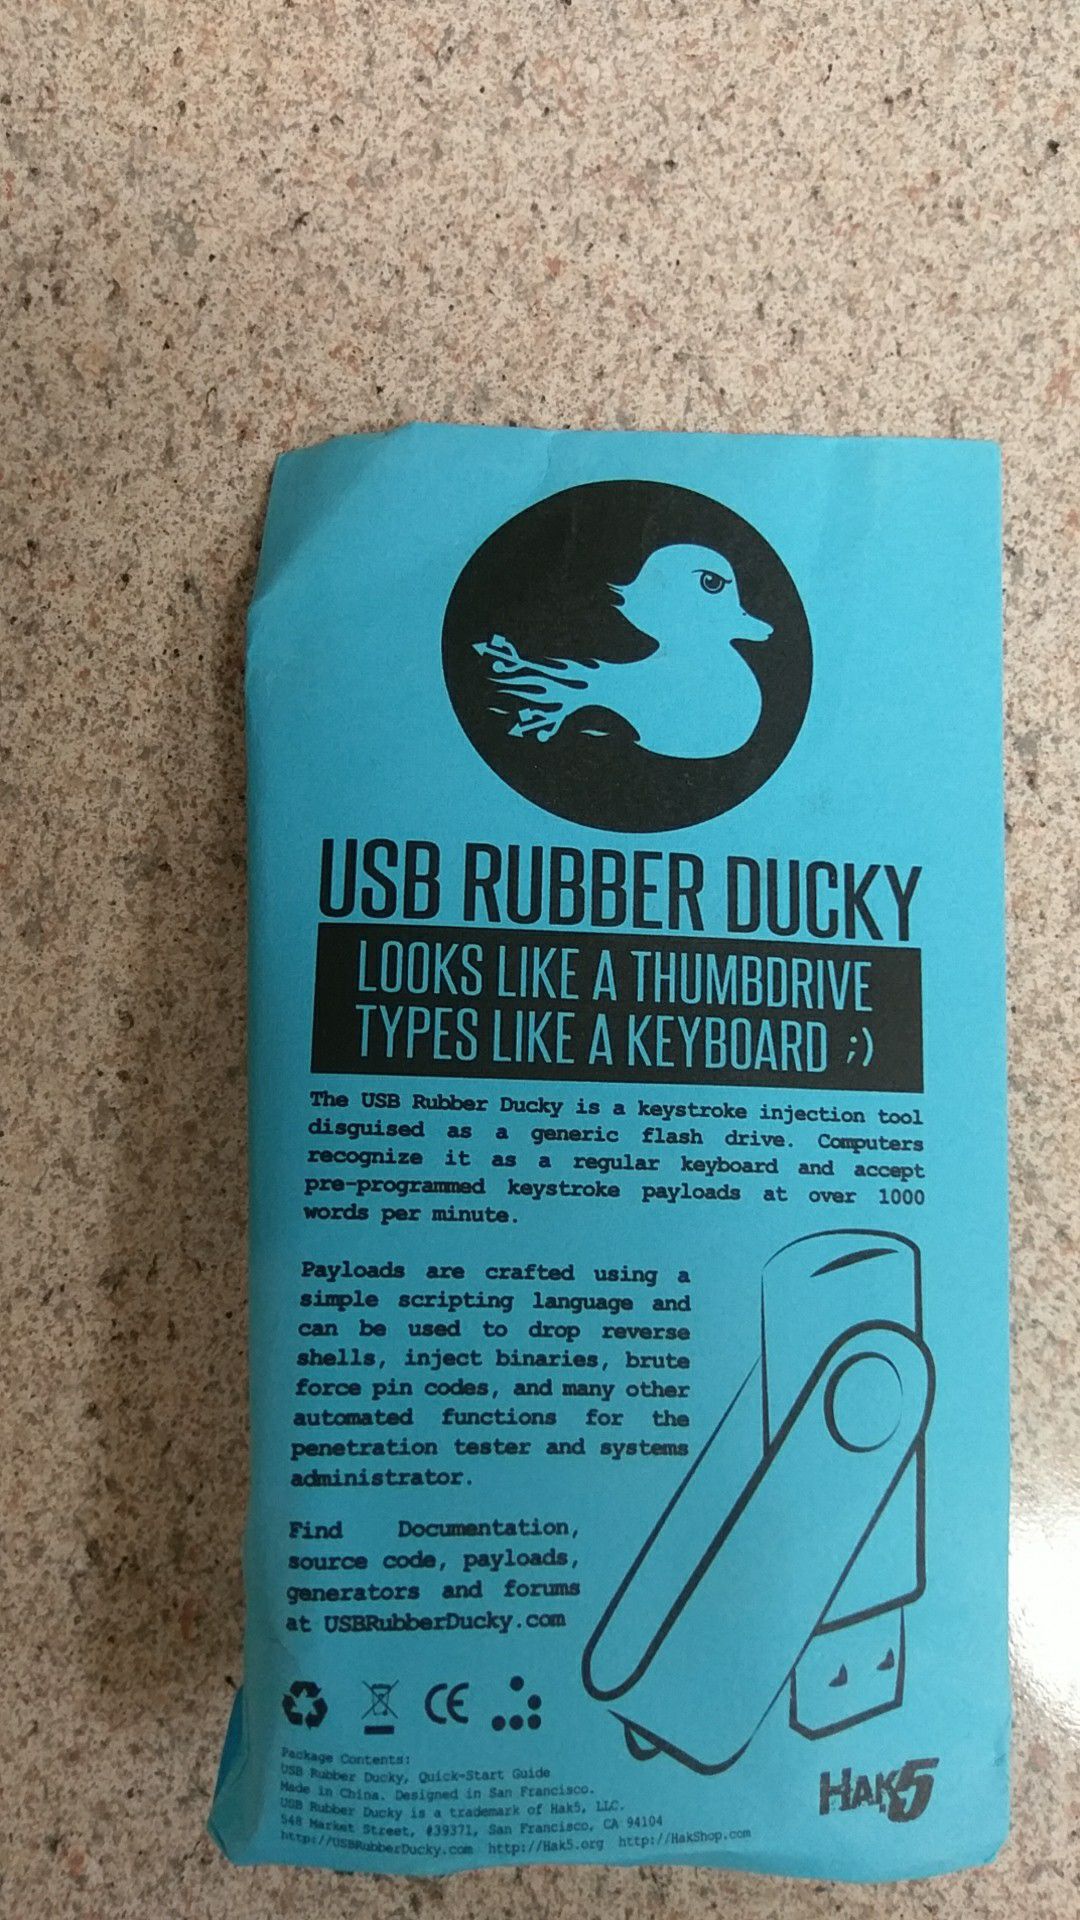 Rubber Ducky: Learning About the Keystroke Injection